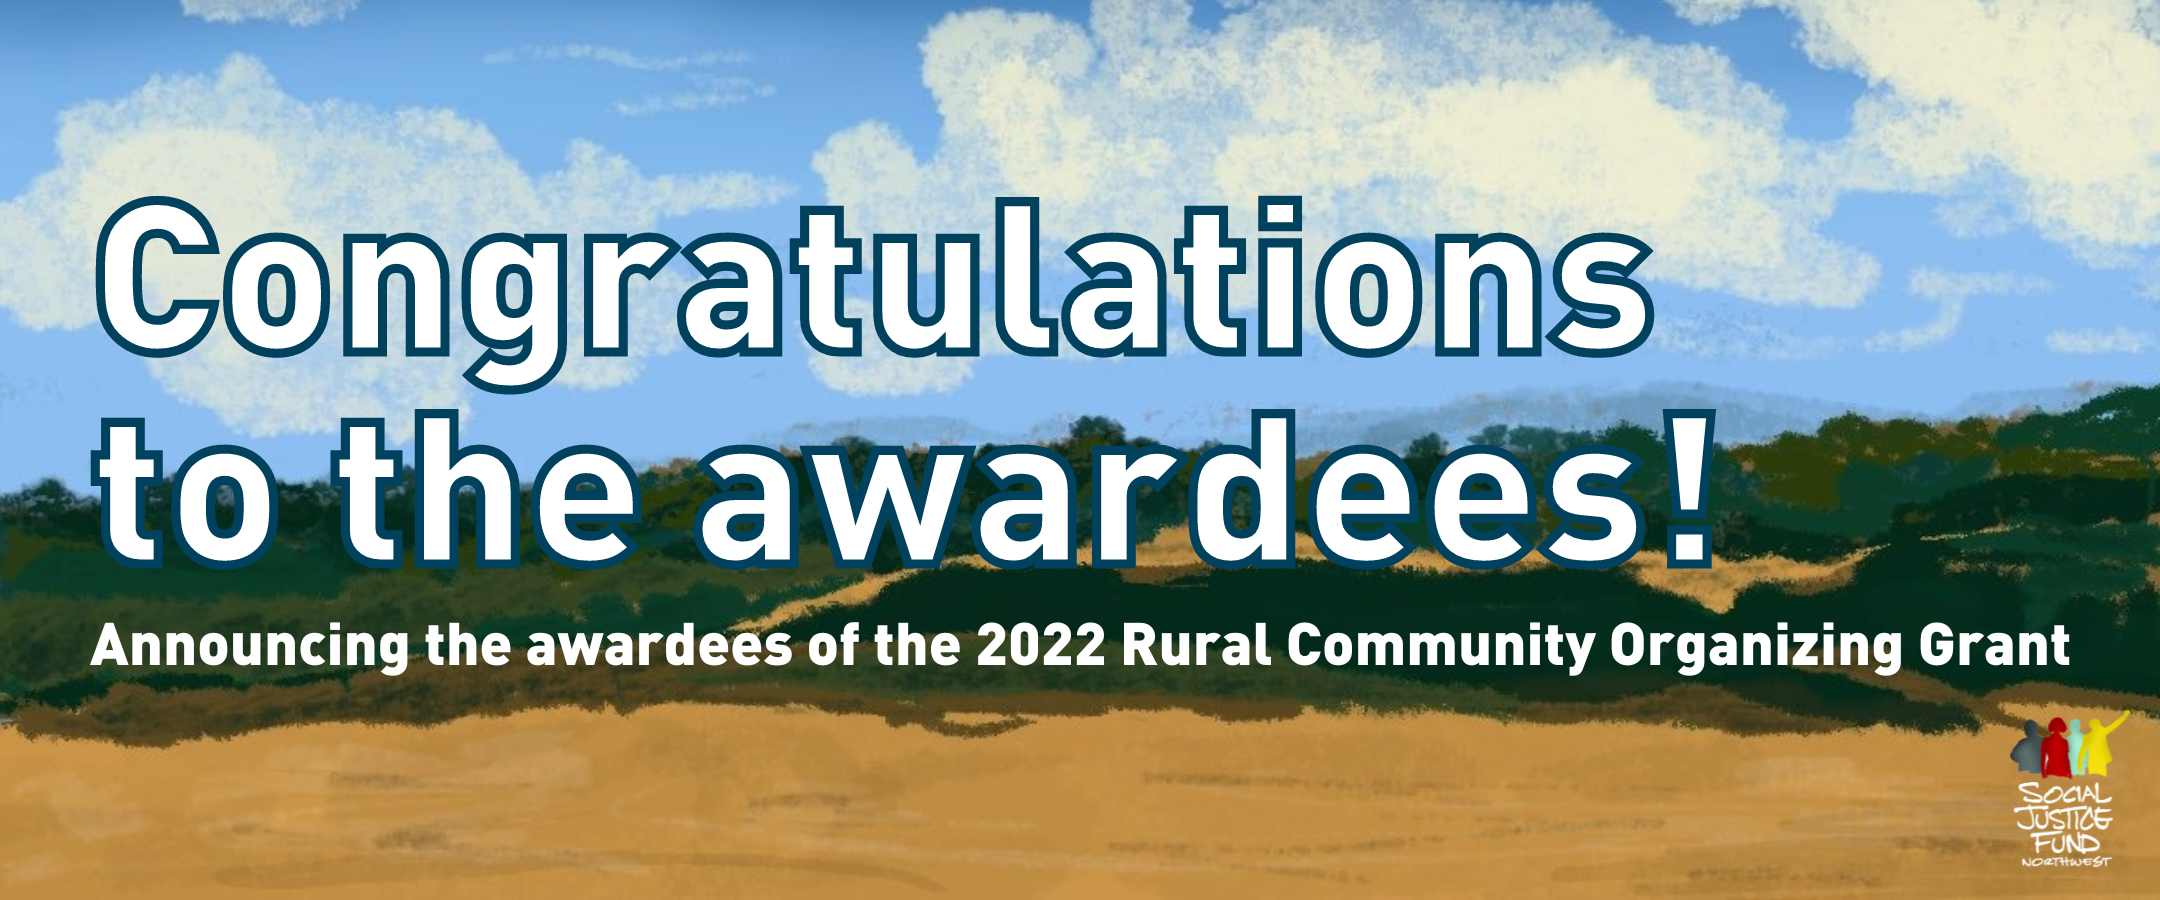 Colorful illustration of a rural Idaho landscape. Text reads Congratulations to the awardees. Announcing the awardees of the 2022 Rural Community Organizing Grant.